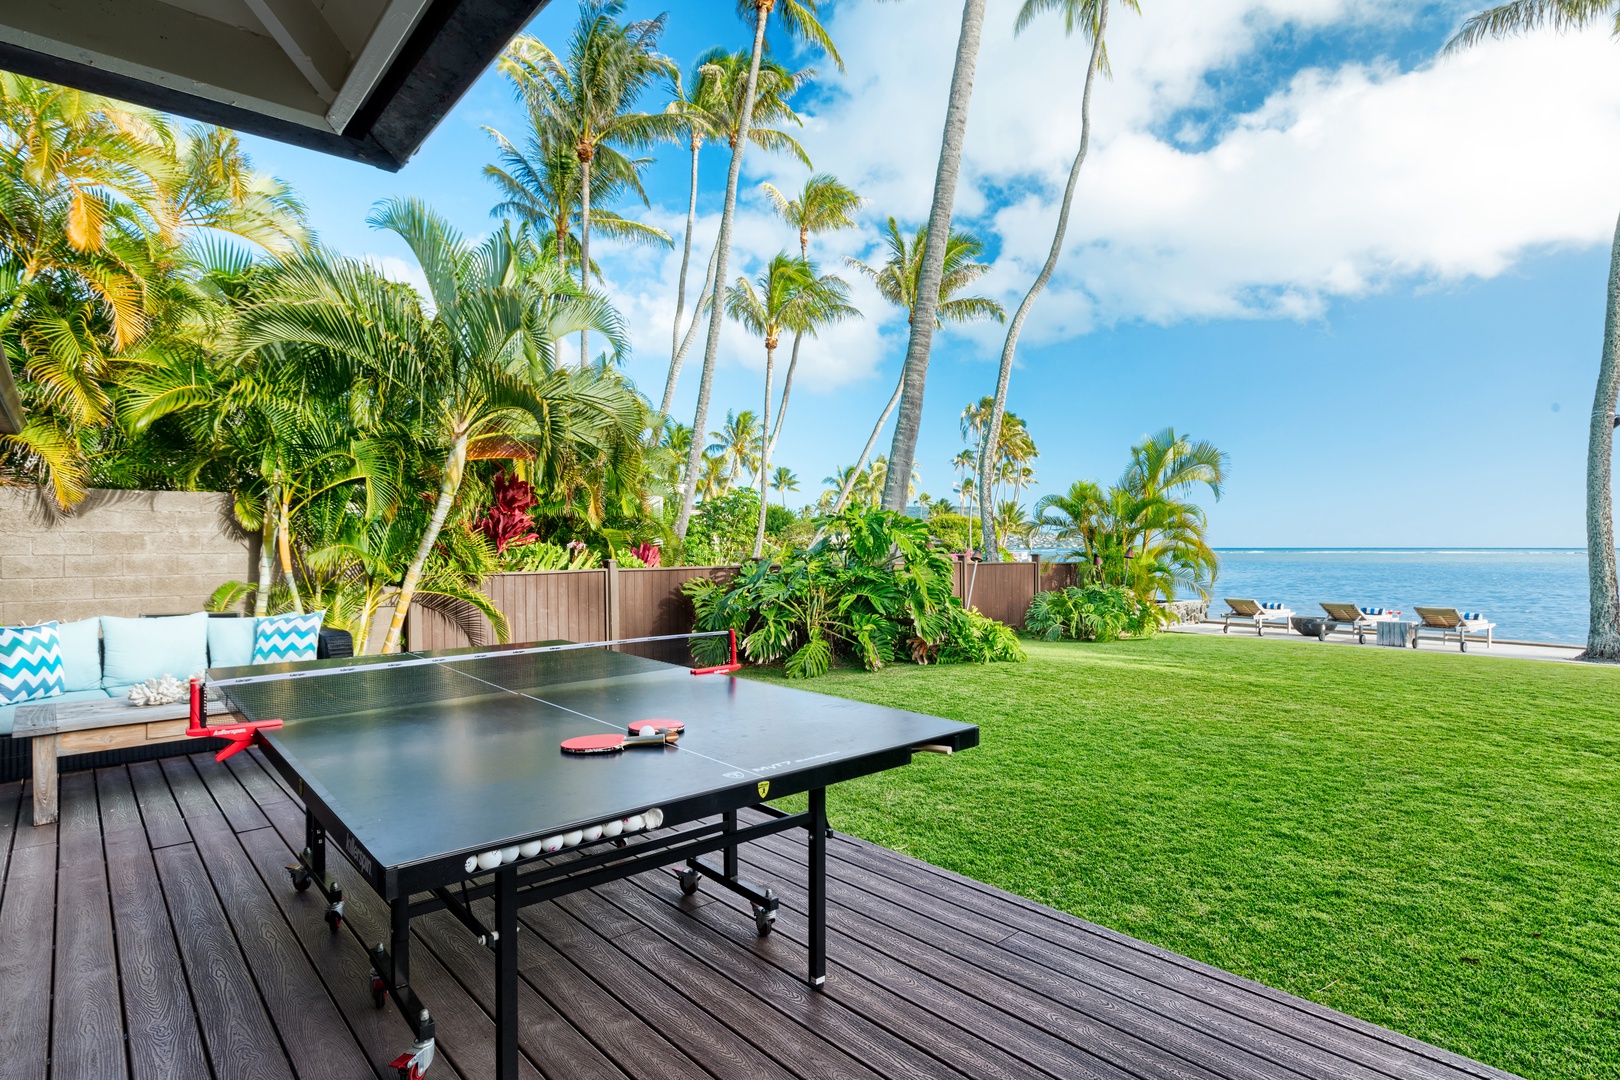 Honolulu Vacation Rentals, Moana Lani - Your very own ping-pong table, available to be set up before your arrival! Just let your reservation manager know you would like it.